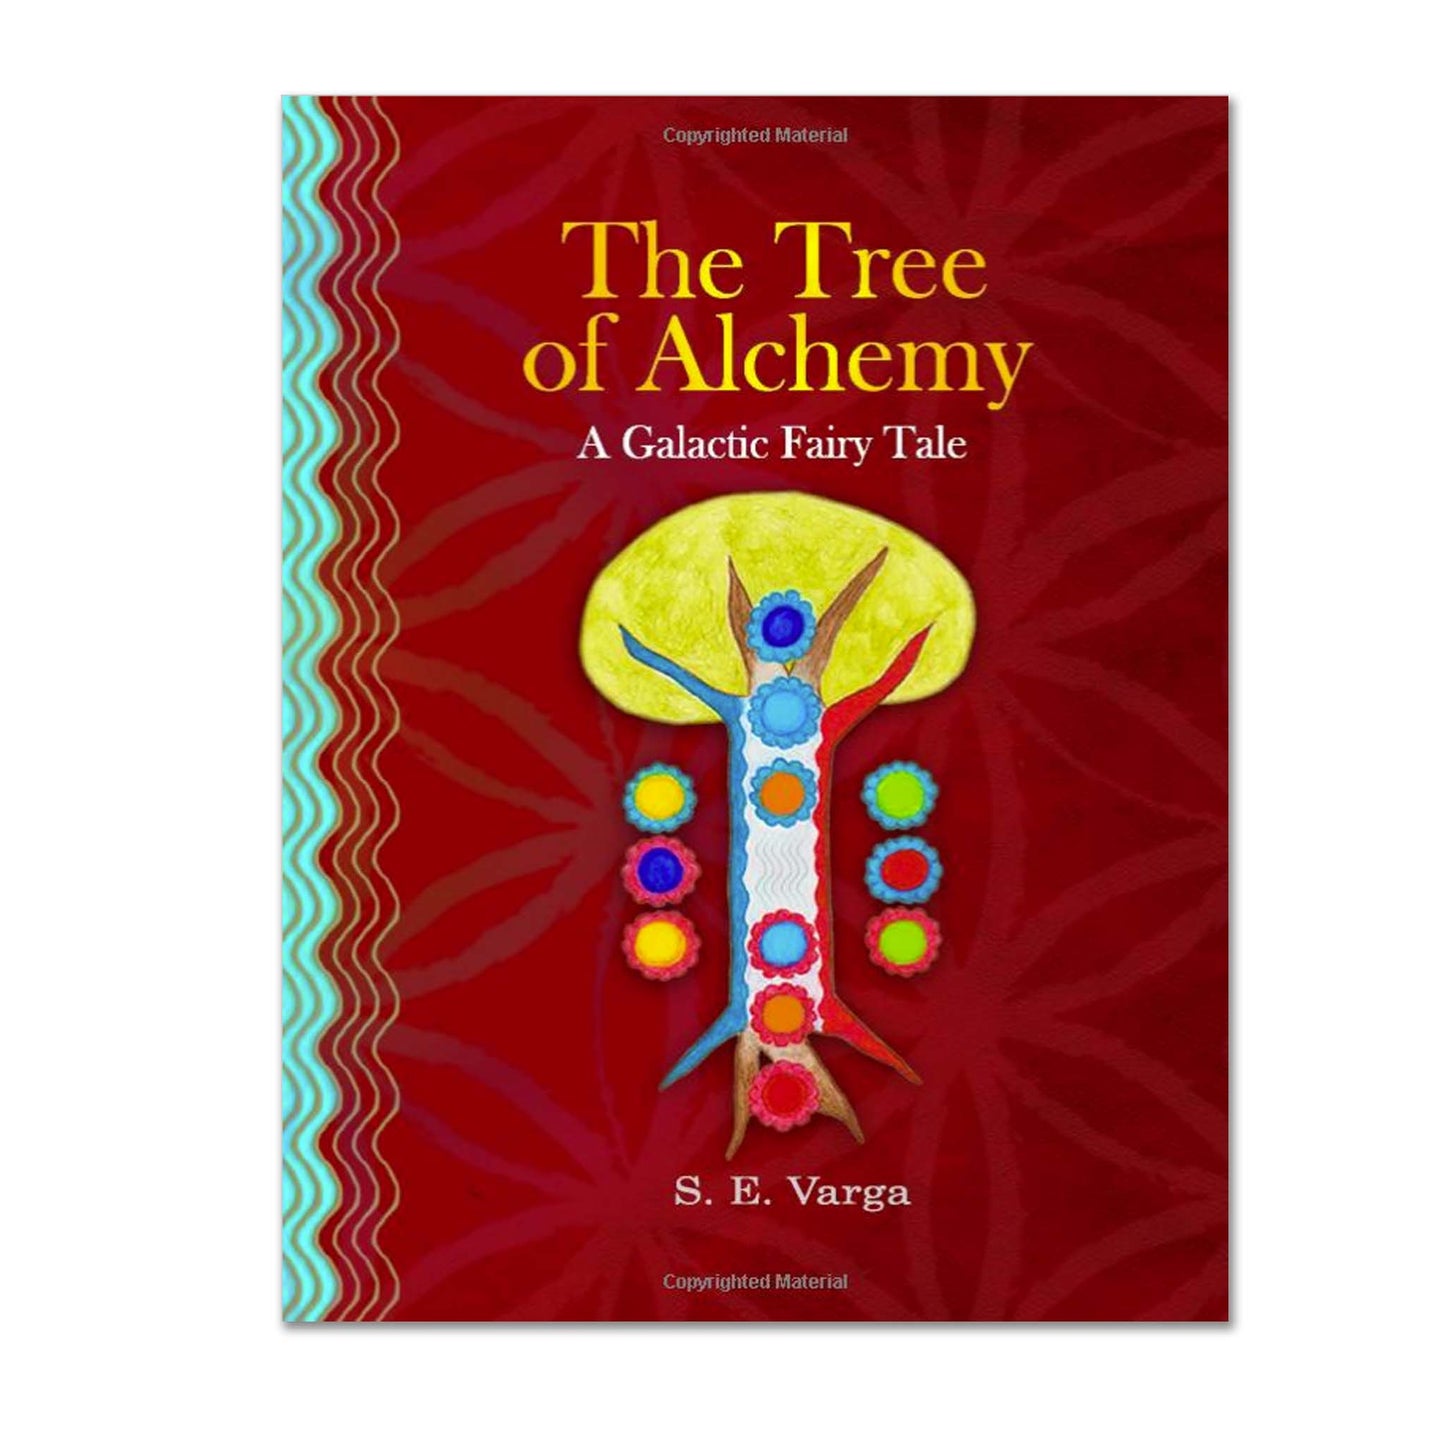 The Tree of Alchemy: A Galactic Fairy Tale